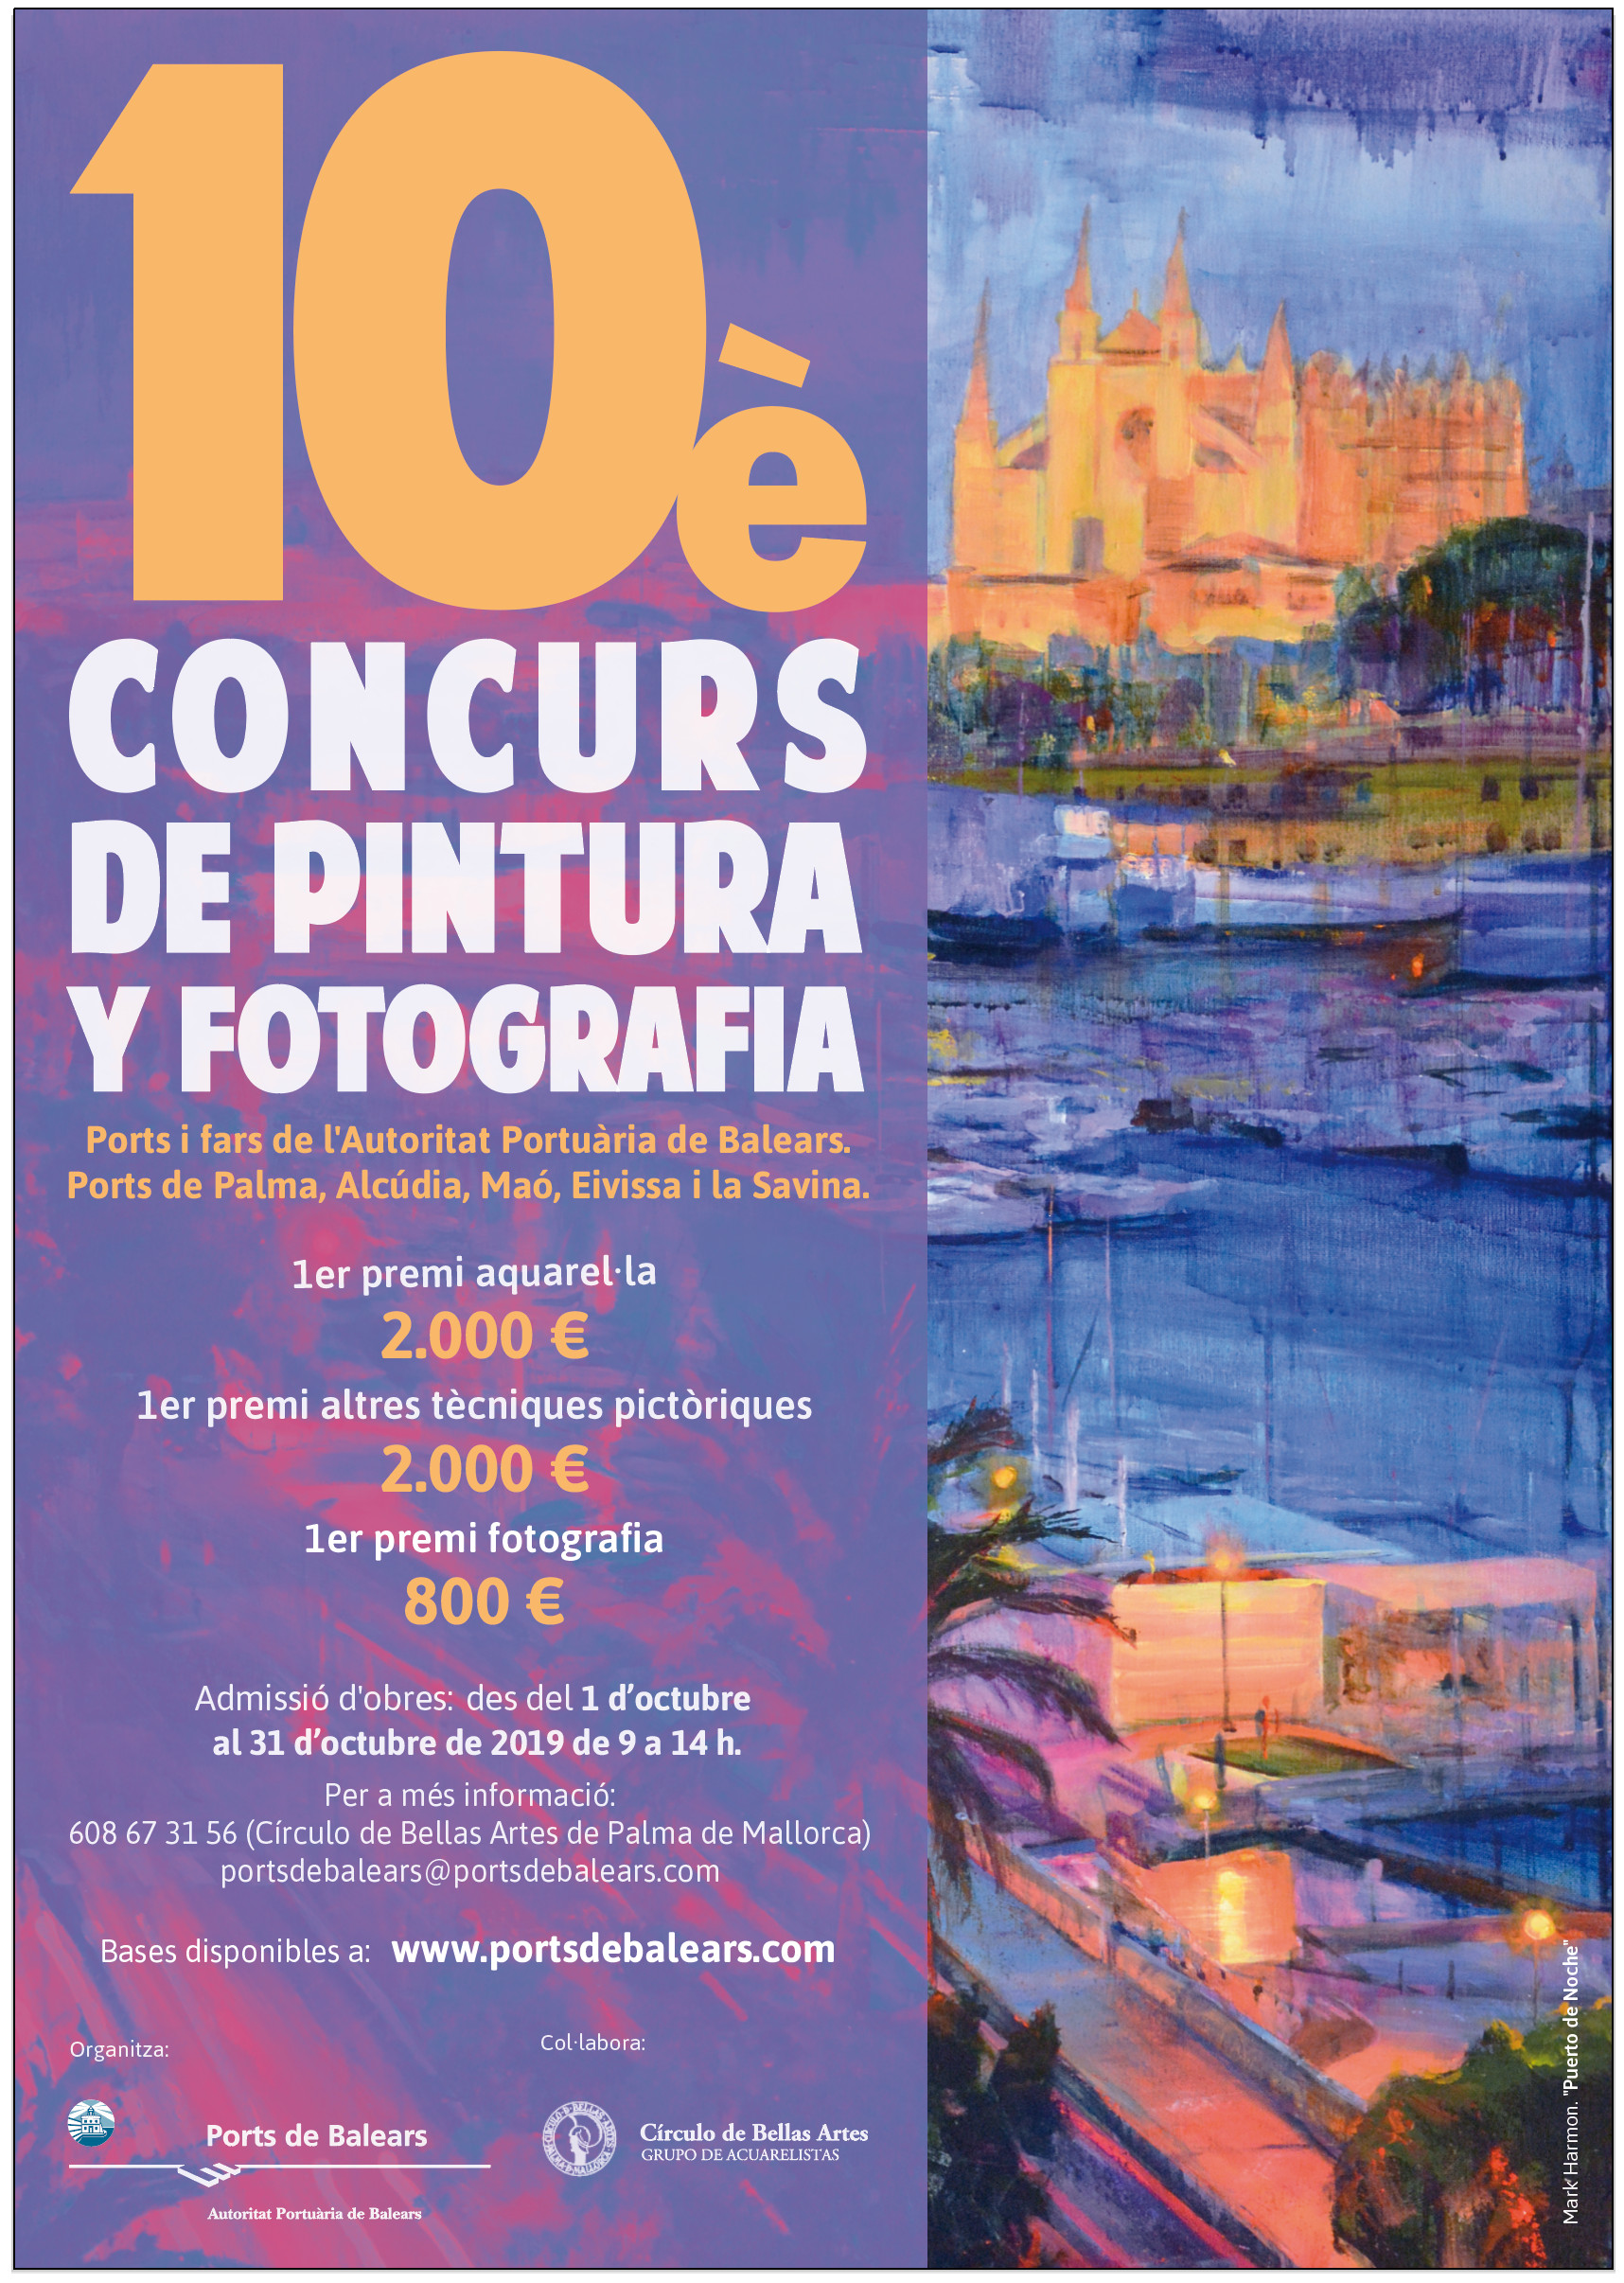 THE PORT AUTHORITY OF THE BALEARIC ISLANDS INVITES YOU TO THE TENTH EDITION OF ITS PAINTING AND PHOTOGRAPHY COMPETITION IN COLLABORATION WITH THE CÍRCULO DE BELLAS ARTES IN PALMA DE MALLORCA